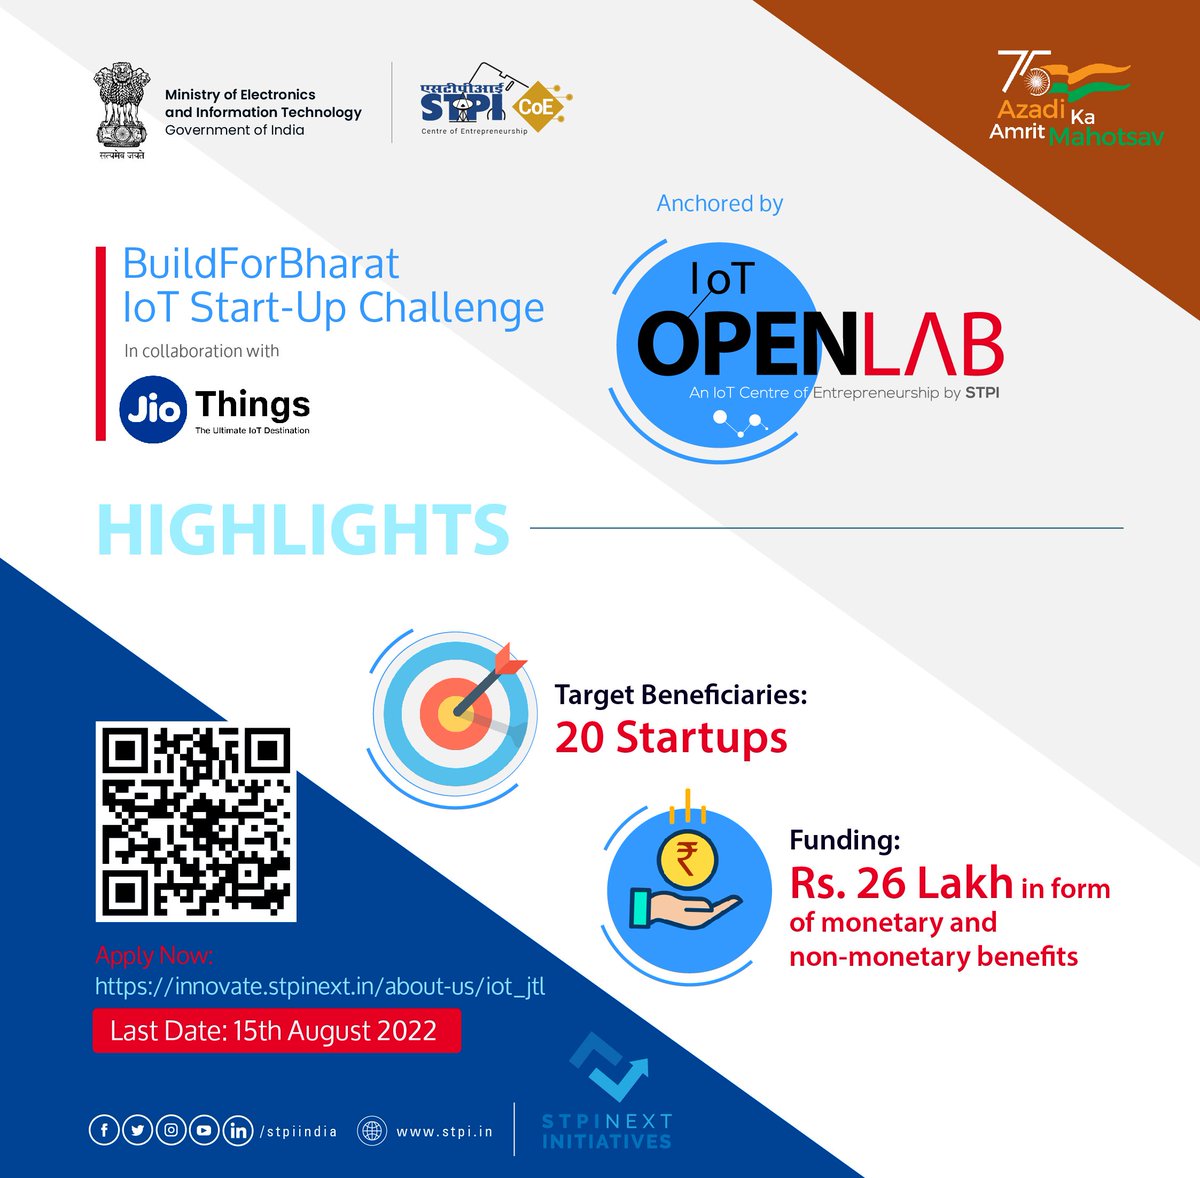 Join #BuildForBharat #IoTStartUpChallenge to translate your unique ideas into #IoT products by leveraging funding of Rs. 26 Lakh in the form of monetary & non-monetary benefits. Apply: innovate.stpinext.in/about-us/iot_j… #STPICoES #STPIINDIA @GoI_MeitY @MSH_MeitY @startupindia @reliancejio